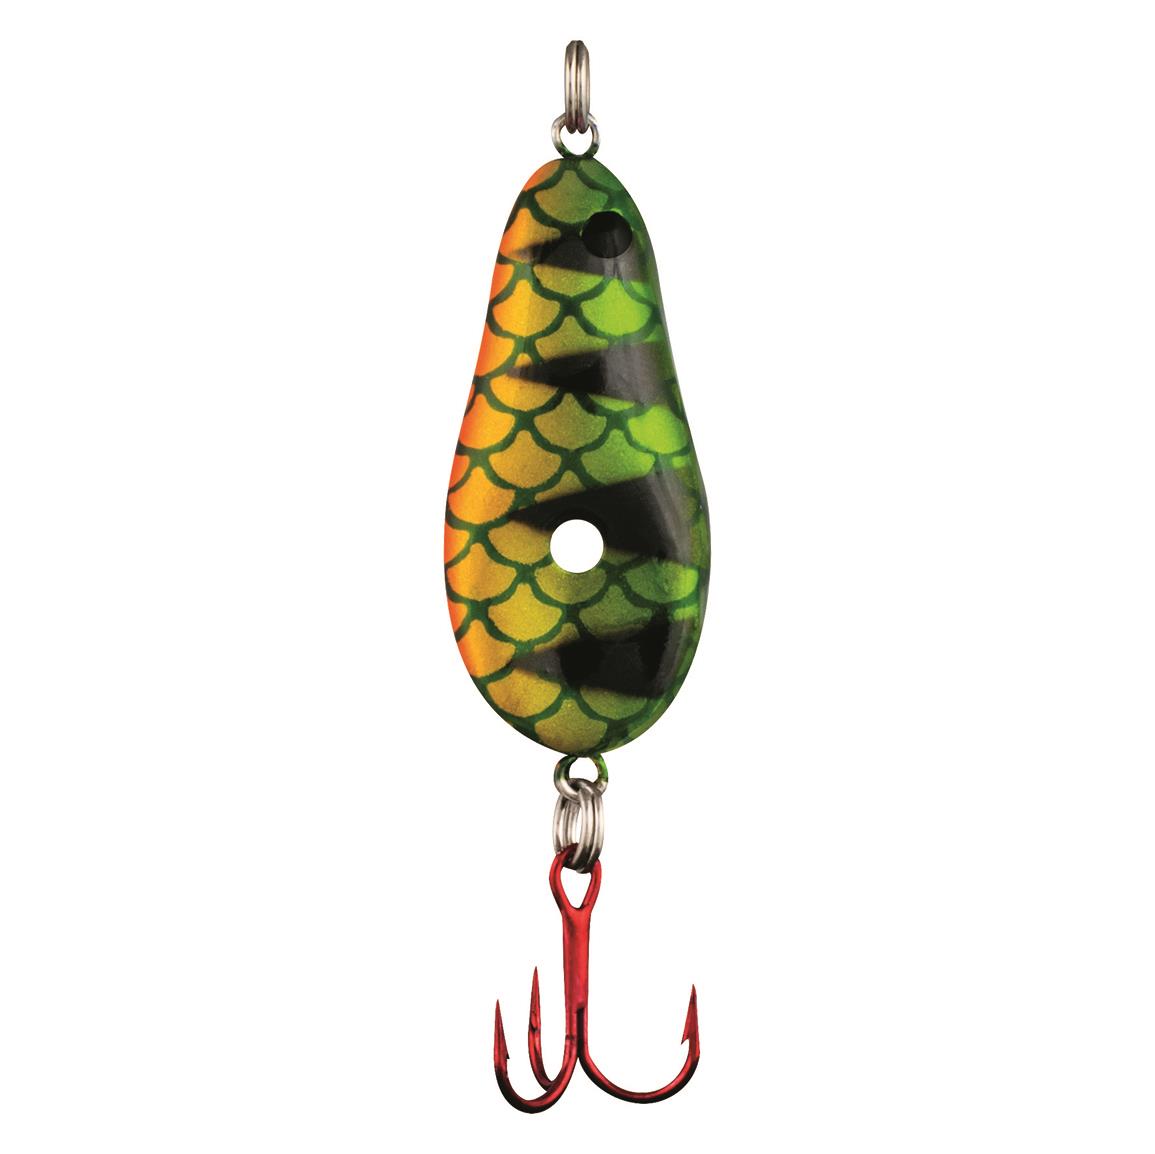 Eurotackle FNM Minnow 1.5, 9 Pack - 738212, Ice Tackle at Sportsman's Guide